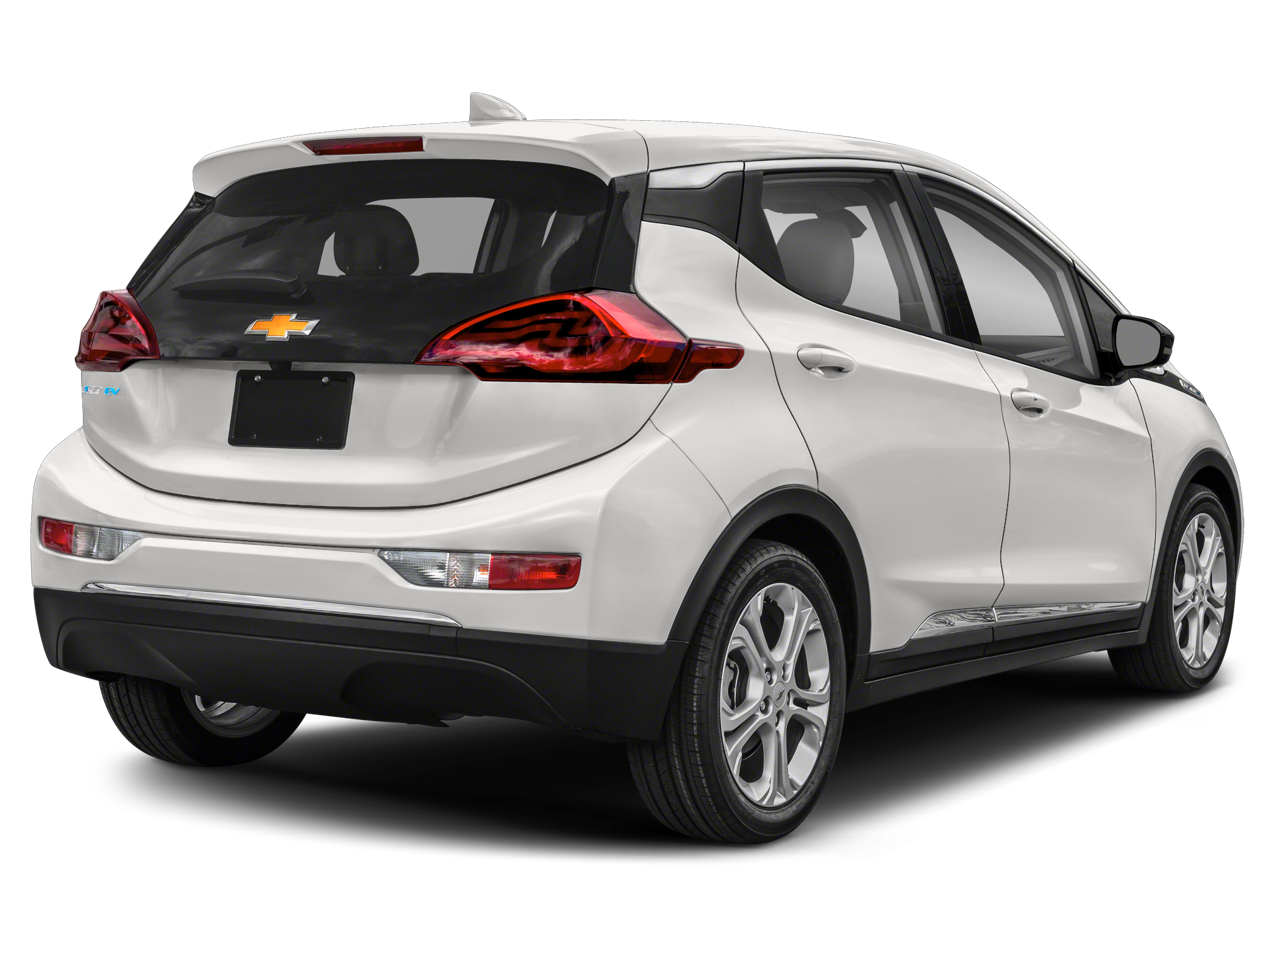 Used 2020 Chevrolet Bolt EV LT with VIN 1G1FY6S0XL4148956 for sale in Upland, CA